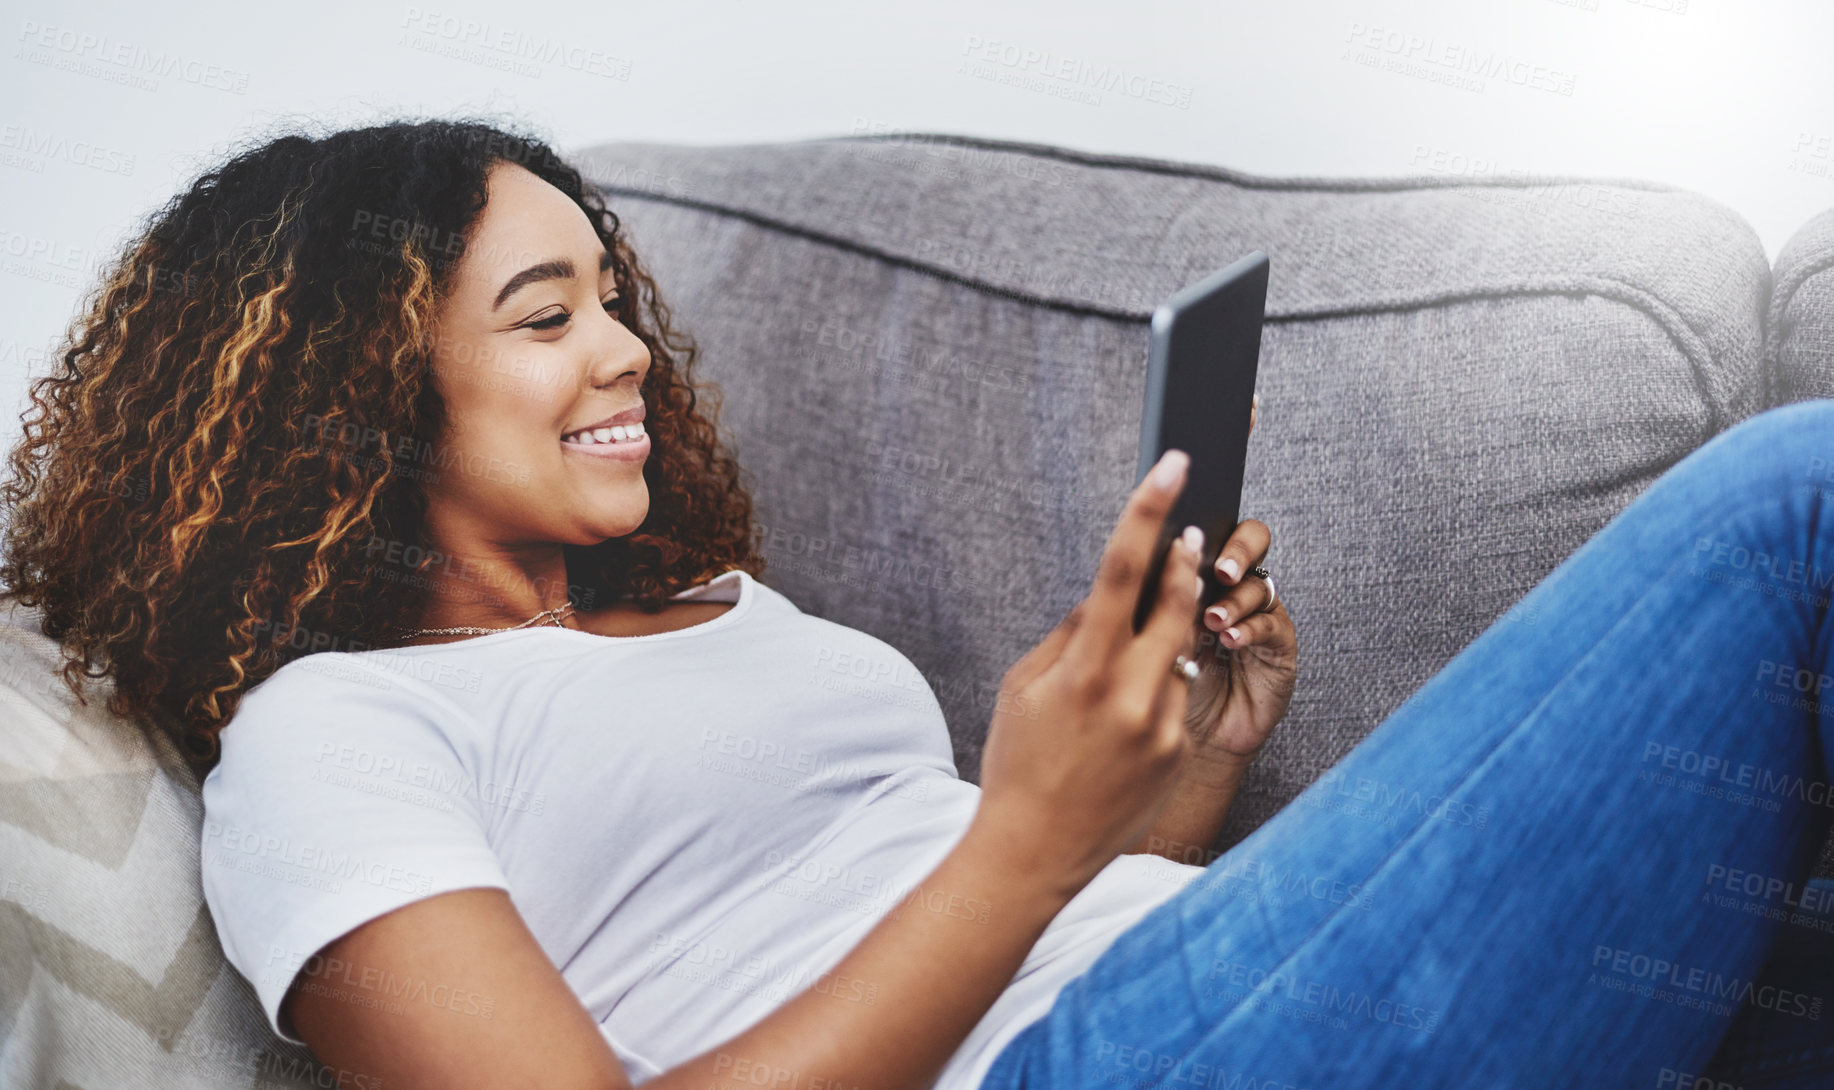 Buy stock photo Shot of an attractive young woman using a digital tablet at home